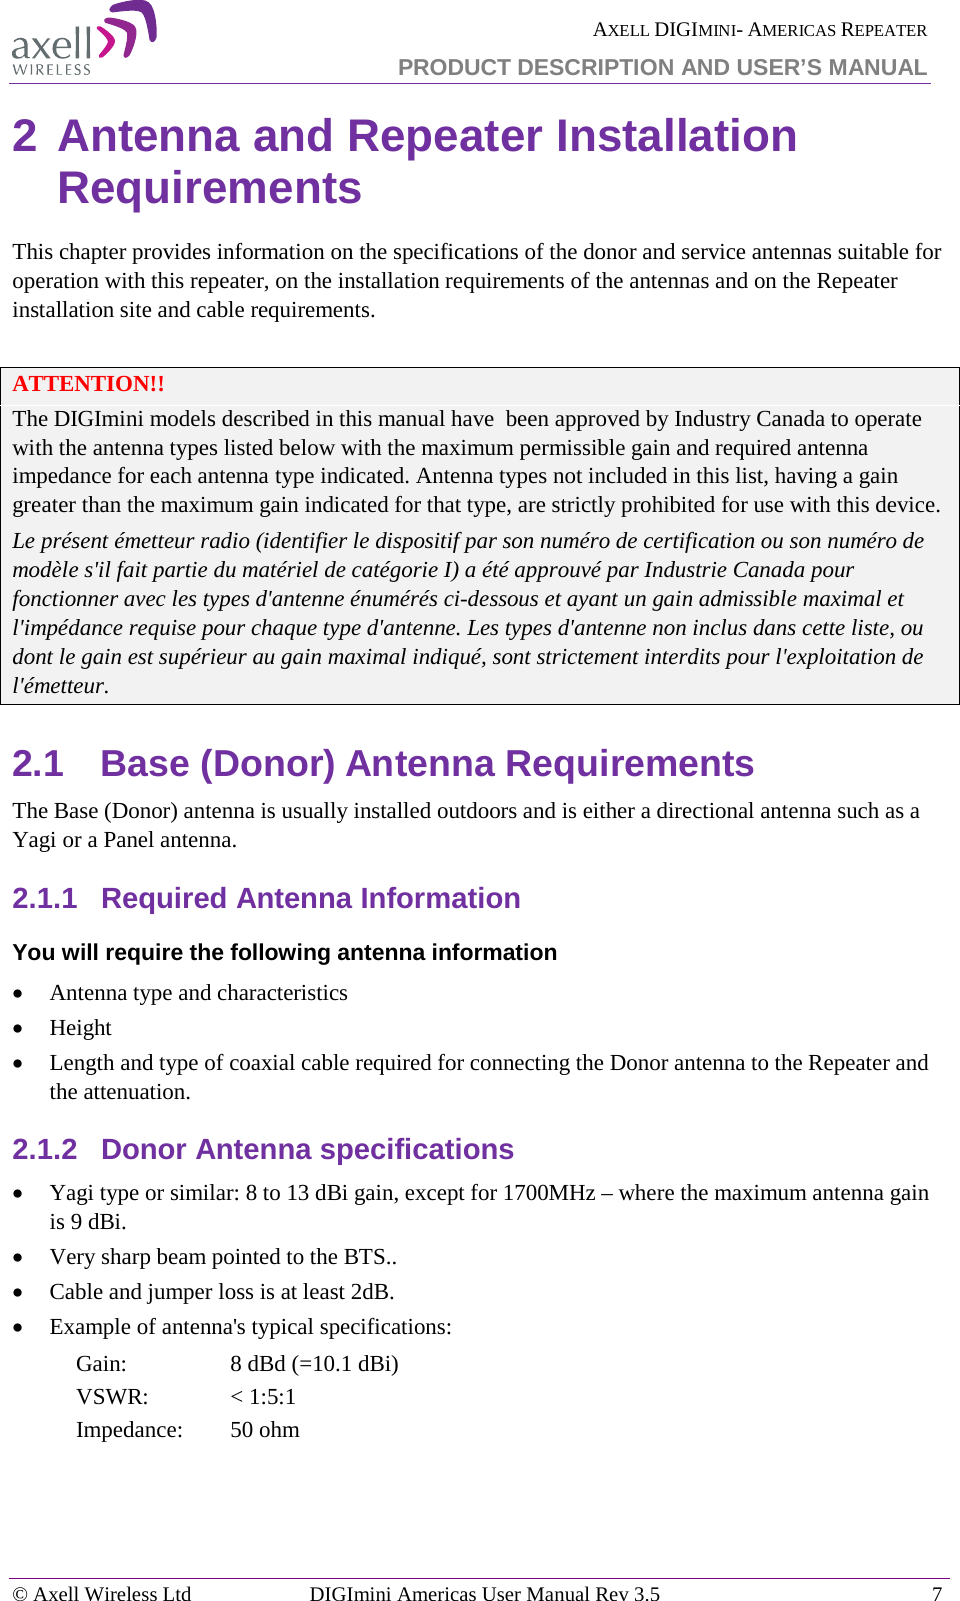  AXELL DIGIMINI- AMERICAS REPEATER PRODUCT DESCRIPTION AND USER’S MANUAL © Axell Wireless Ltd DIGImini Americas User Manual Rev 3.5  7  2 Antenna and Repeater Installation Requirements This chapter provides information on the specifications of the donor and service antennas suitable for operation with this repeater, on the installation requirements of the antennas and on the Repeater installation site and cable requirements.  ATTENTION!! The DIGImini models described in this manual have  been approved by Industry Canada to operate with the antenna types listed below with the maximum permissible gain and required antenna impedance for each antenna type indicated. Antenna types not included in this list, having a gain greater than the maximum gain indicated for that type, are strictly prohibited for use with this device. Le présent émetteur radio (identifier le dispositif par son numéro de certification ou son numéro de modèle s&apos;il fait partie du matériel de catégorie I) a été approuvé par Industrie Canada pour fonctionner avec les types d&apos;antenne énumérés ci-dessous et ayant un gain admissible maximal et l&apos;impédance requise pour chaque type d&apos;antenne. Les types d&apos;antenne non inclus dans cette liste, ou dont le gain est supérieur au gain maximal indiqué, sont strictement interdits pour l&apos;exploitation de l&apos;émetteur. 2.1  Base (Donor) Antenna Requirements The Base (Donor) antenna is usually installed outdoors and is either a directional antenna such as a Yagi or a Panel antenna. 2.1.1  Required Antenna Information You will require the following antenna information • Antenna type and characteristics • Height • Length and type of coaxial cable required for connecting the Donor antenna to the Repeater and the attenuation. 2.1.2  Donor Antenna specifications • Yagi type or similar: 8 to 13 dBi gain, except for 1700MHz – where the maximum antenna gain is 9 dBi.   • Very sharp beam pointed to the BTS.. • Cable and jumper loss is at least 2dB. • Example of antenna&apos;s typical specifications:  Gain:  8 dBd (=10.1 dBi) VSWR: &lt; 1:5:1 Impedance:  50 ohm    